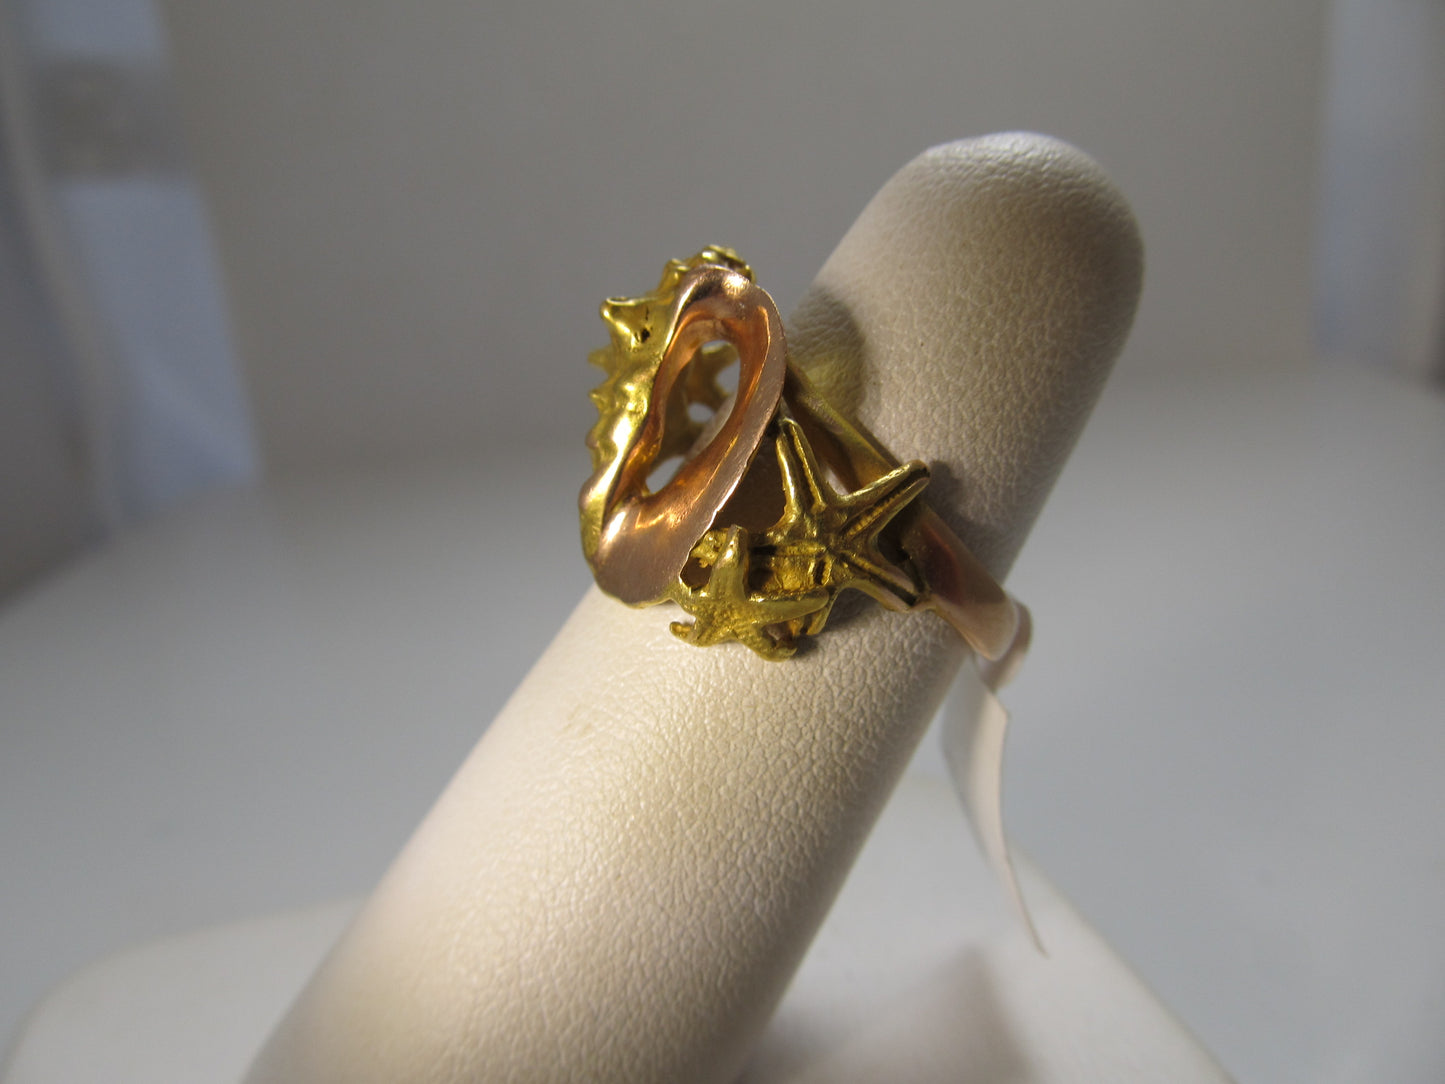 Rose yellow gold shell ring